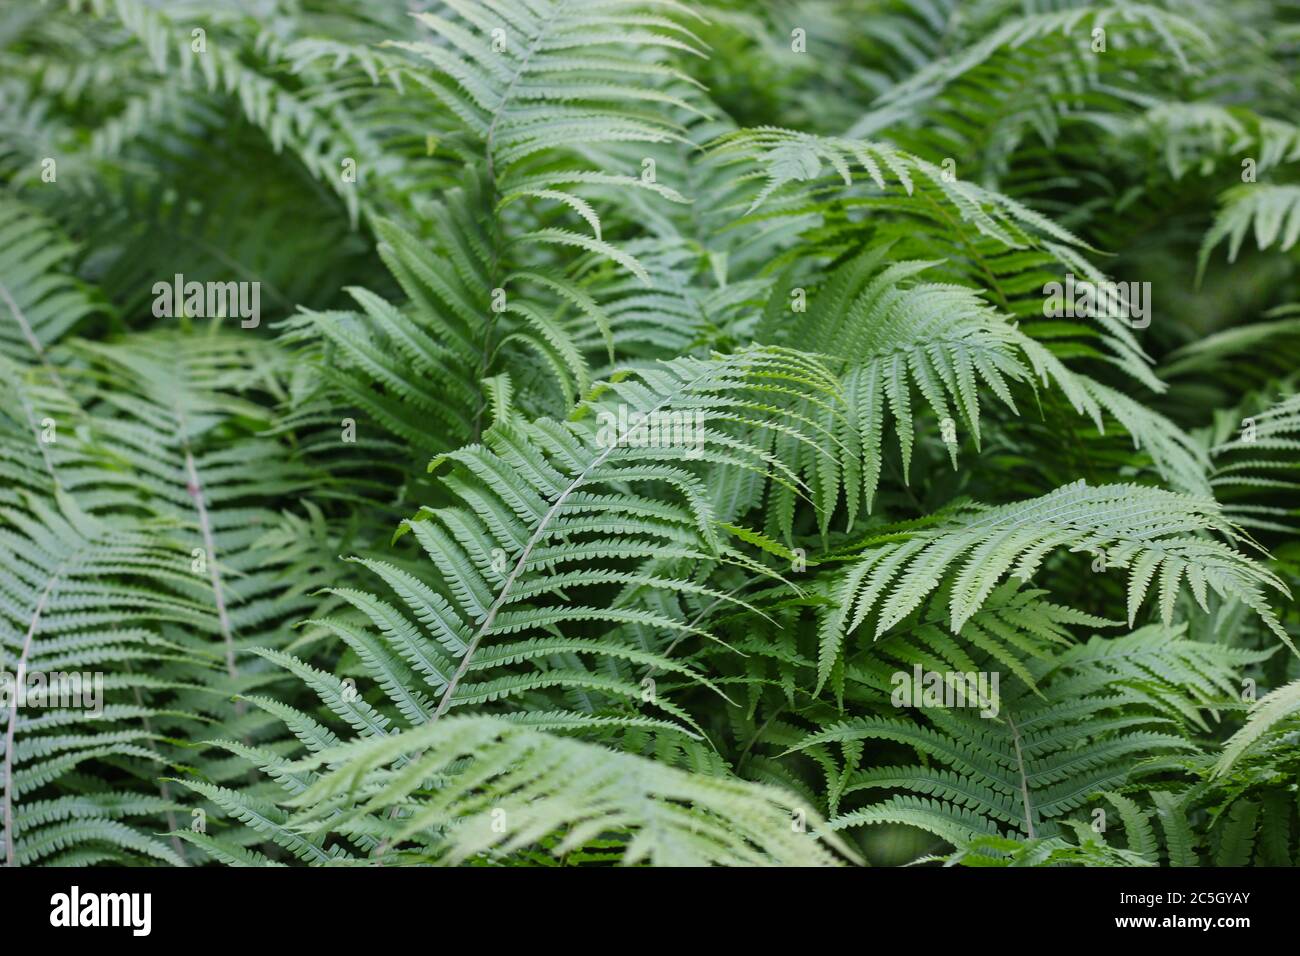 Lush ferns in a forest Stock Photo